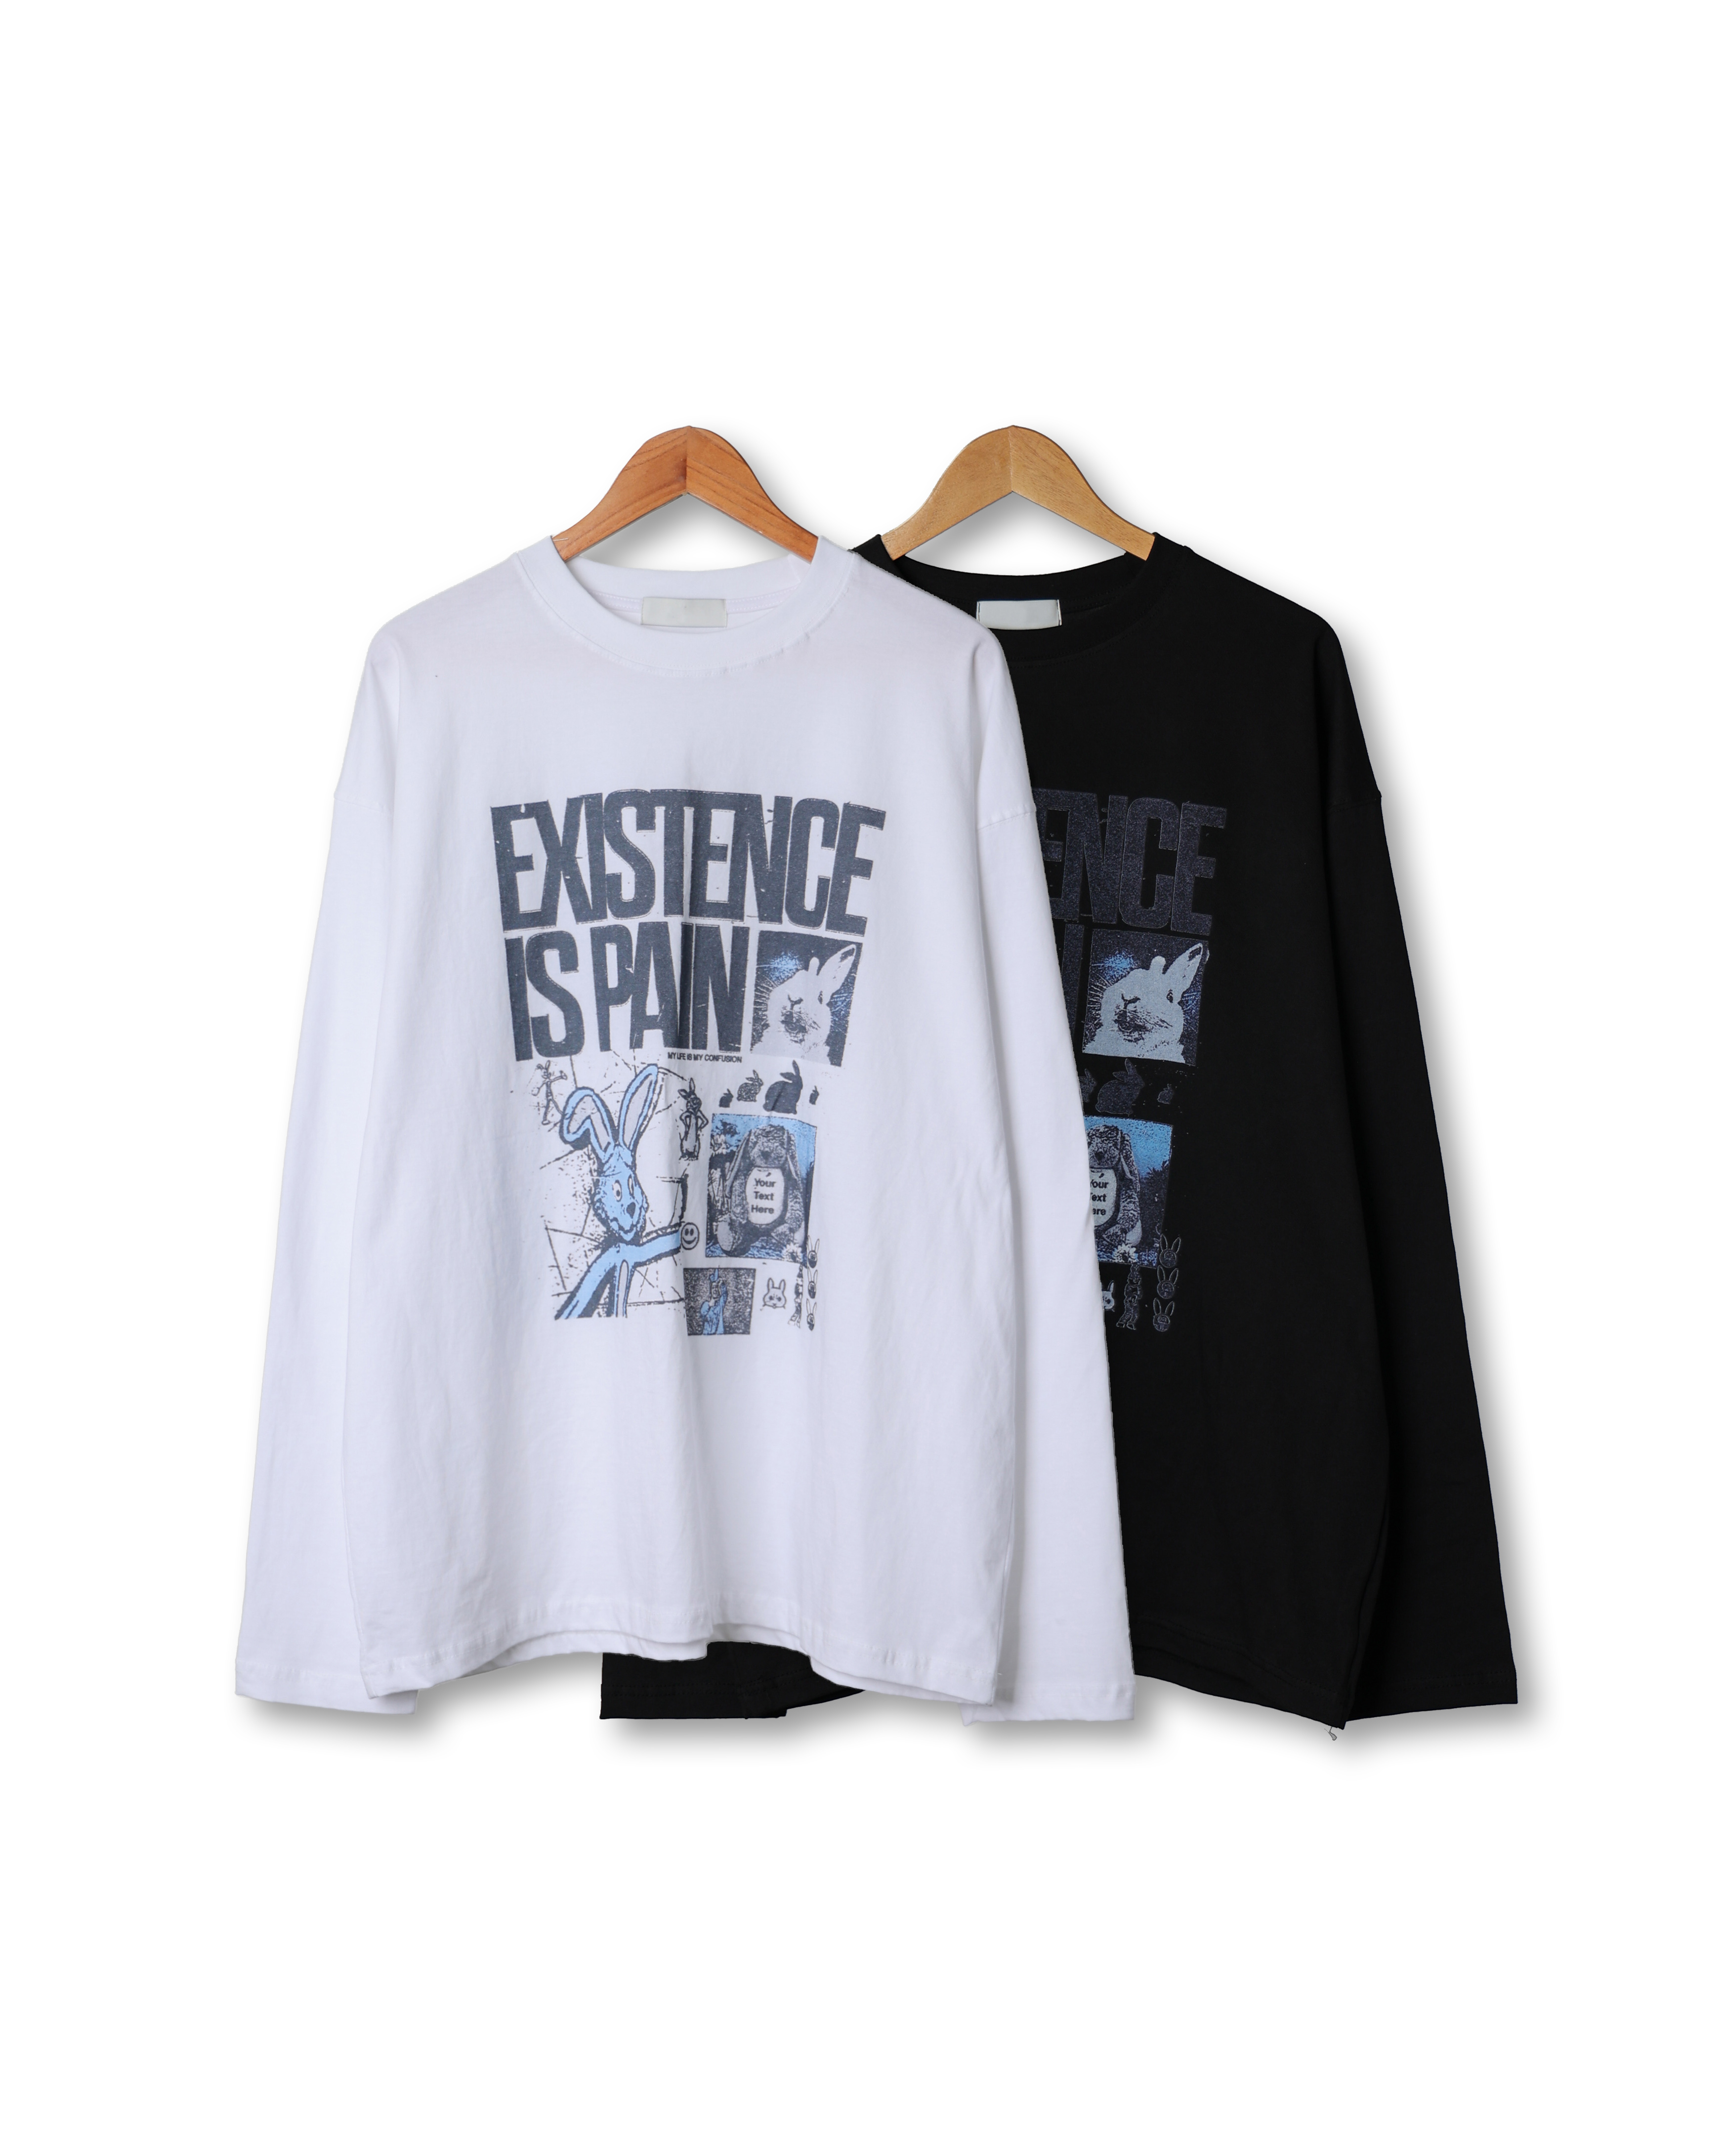 PULS EXISTENCE DTP Graphic Long Sleeve (Black/White)